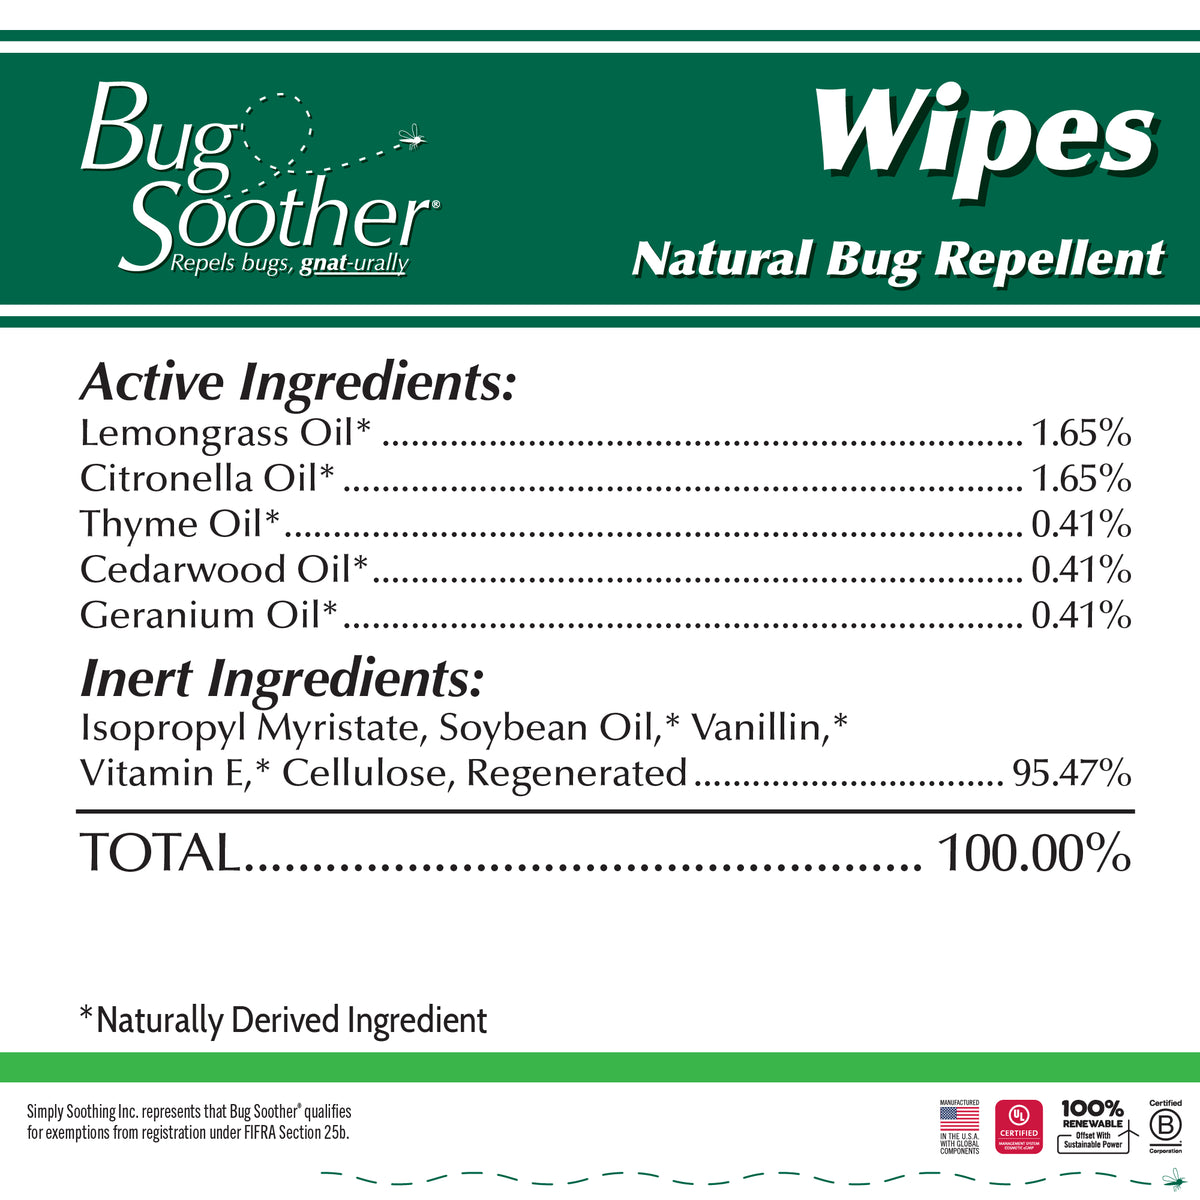 Bug Soother Natural Mosquito Repellent Wipes 15-count